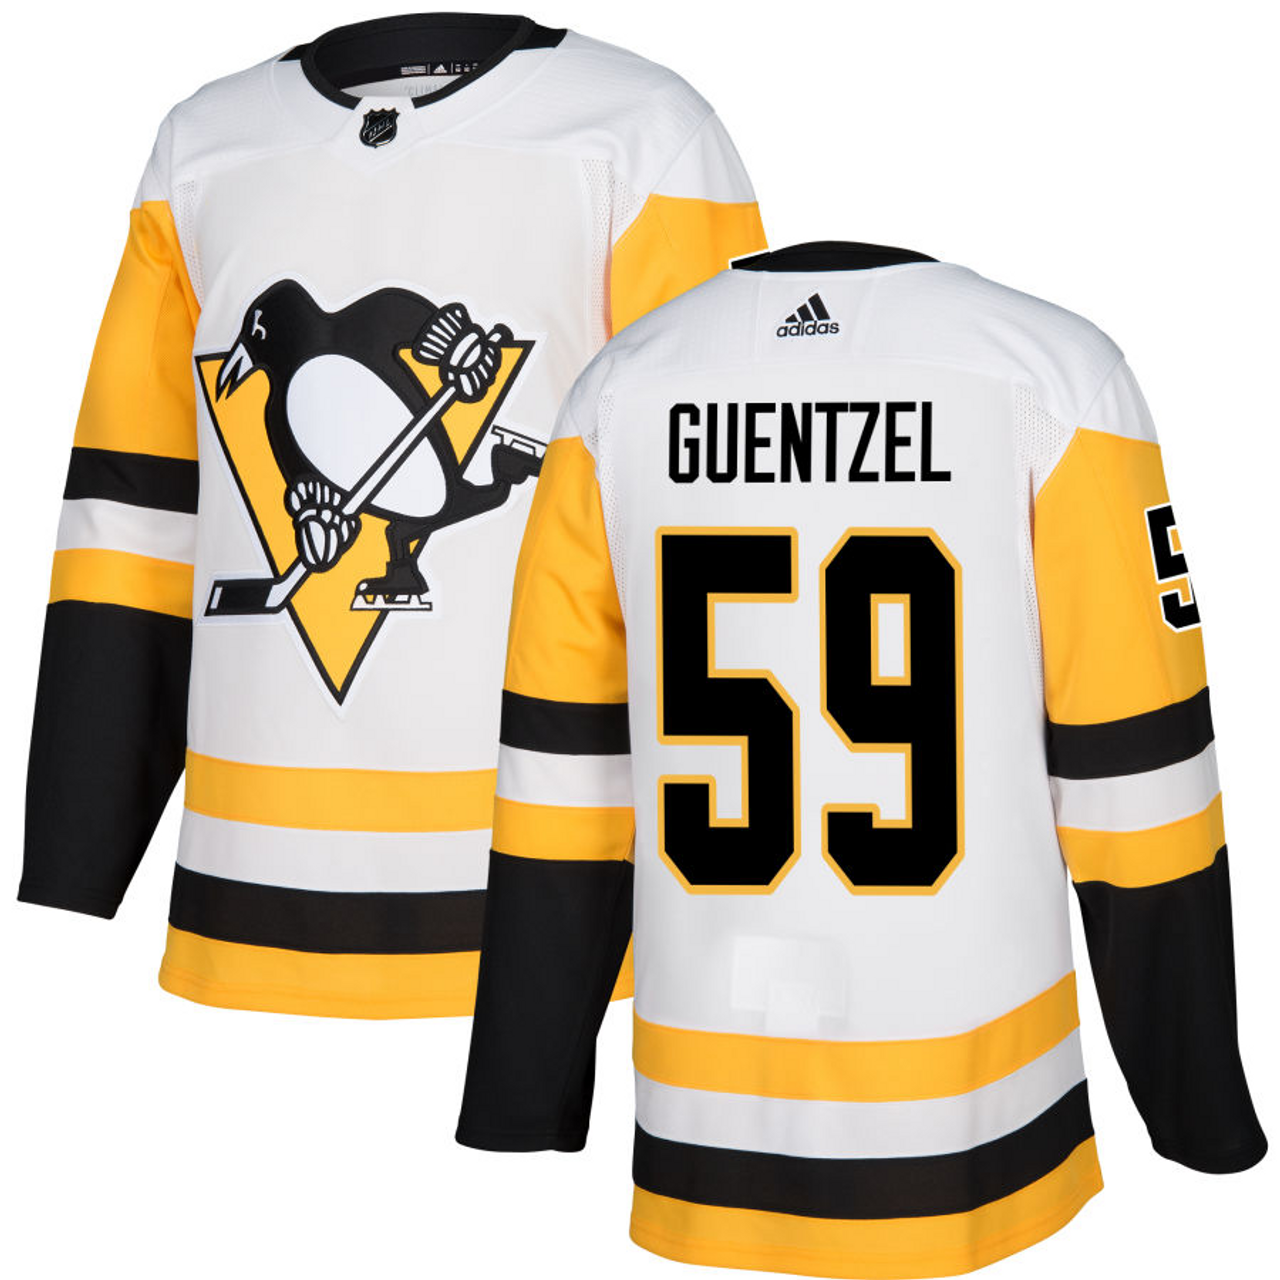 PITTSBURGH PENGUINS AUTHENTIC ALTERNATE GUENTZEL JERSEY